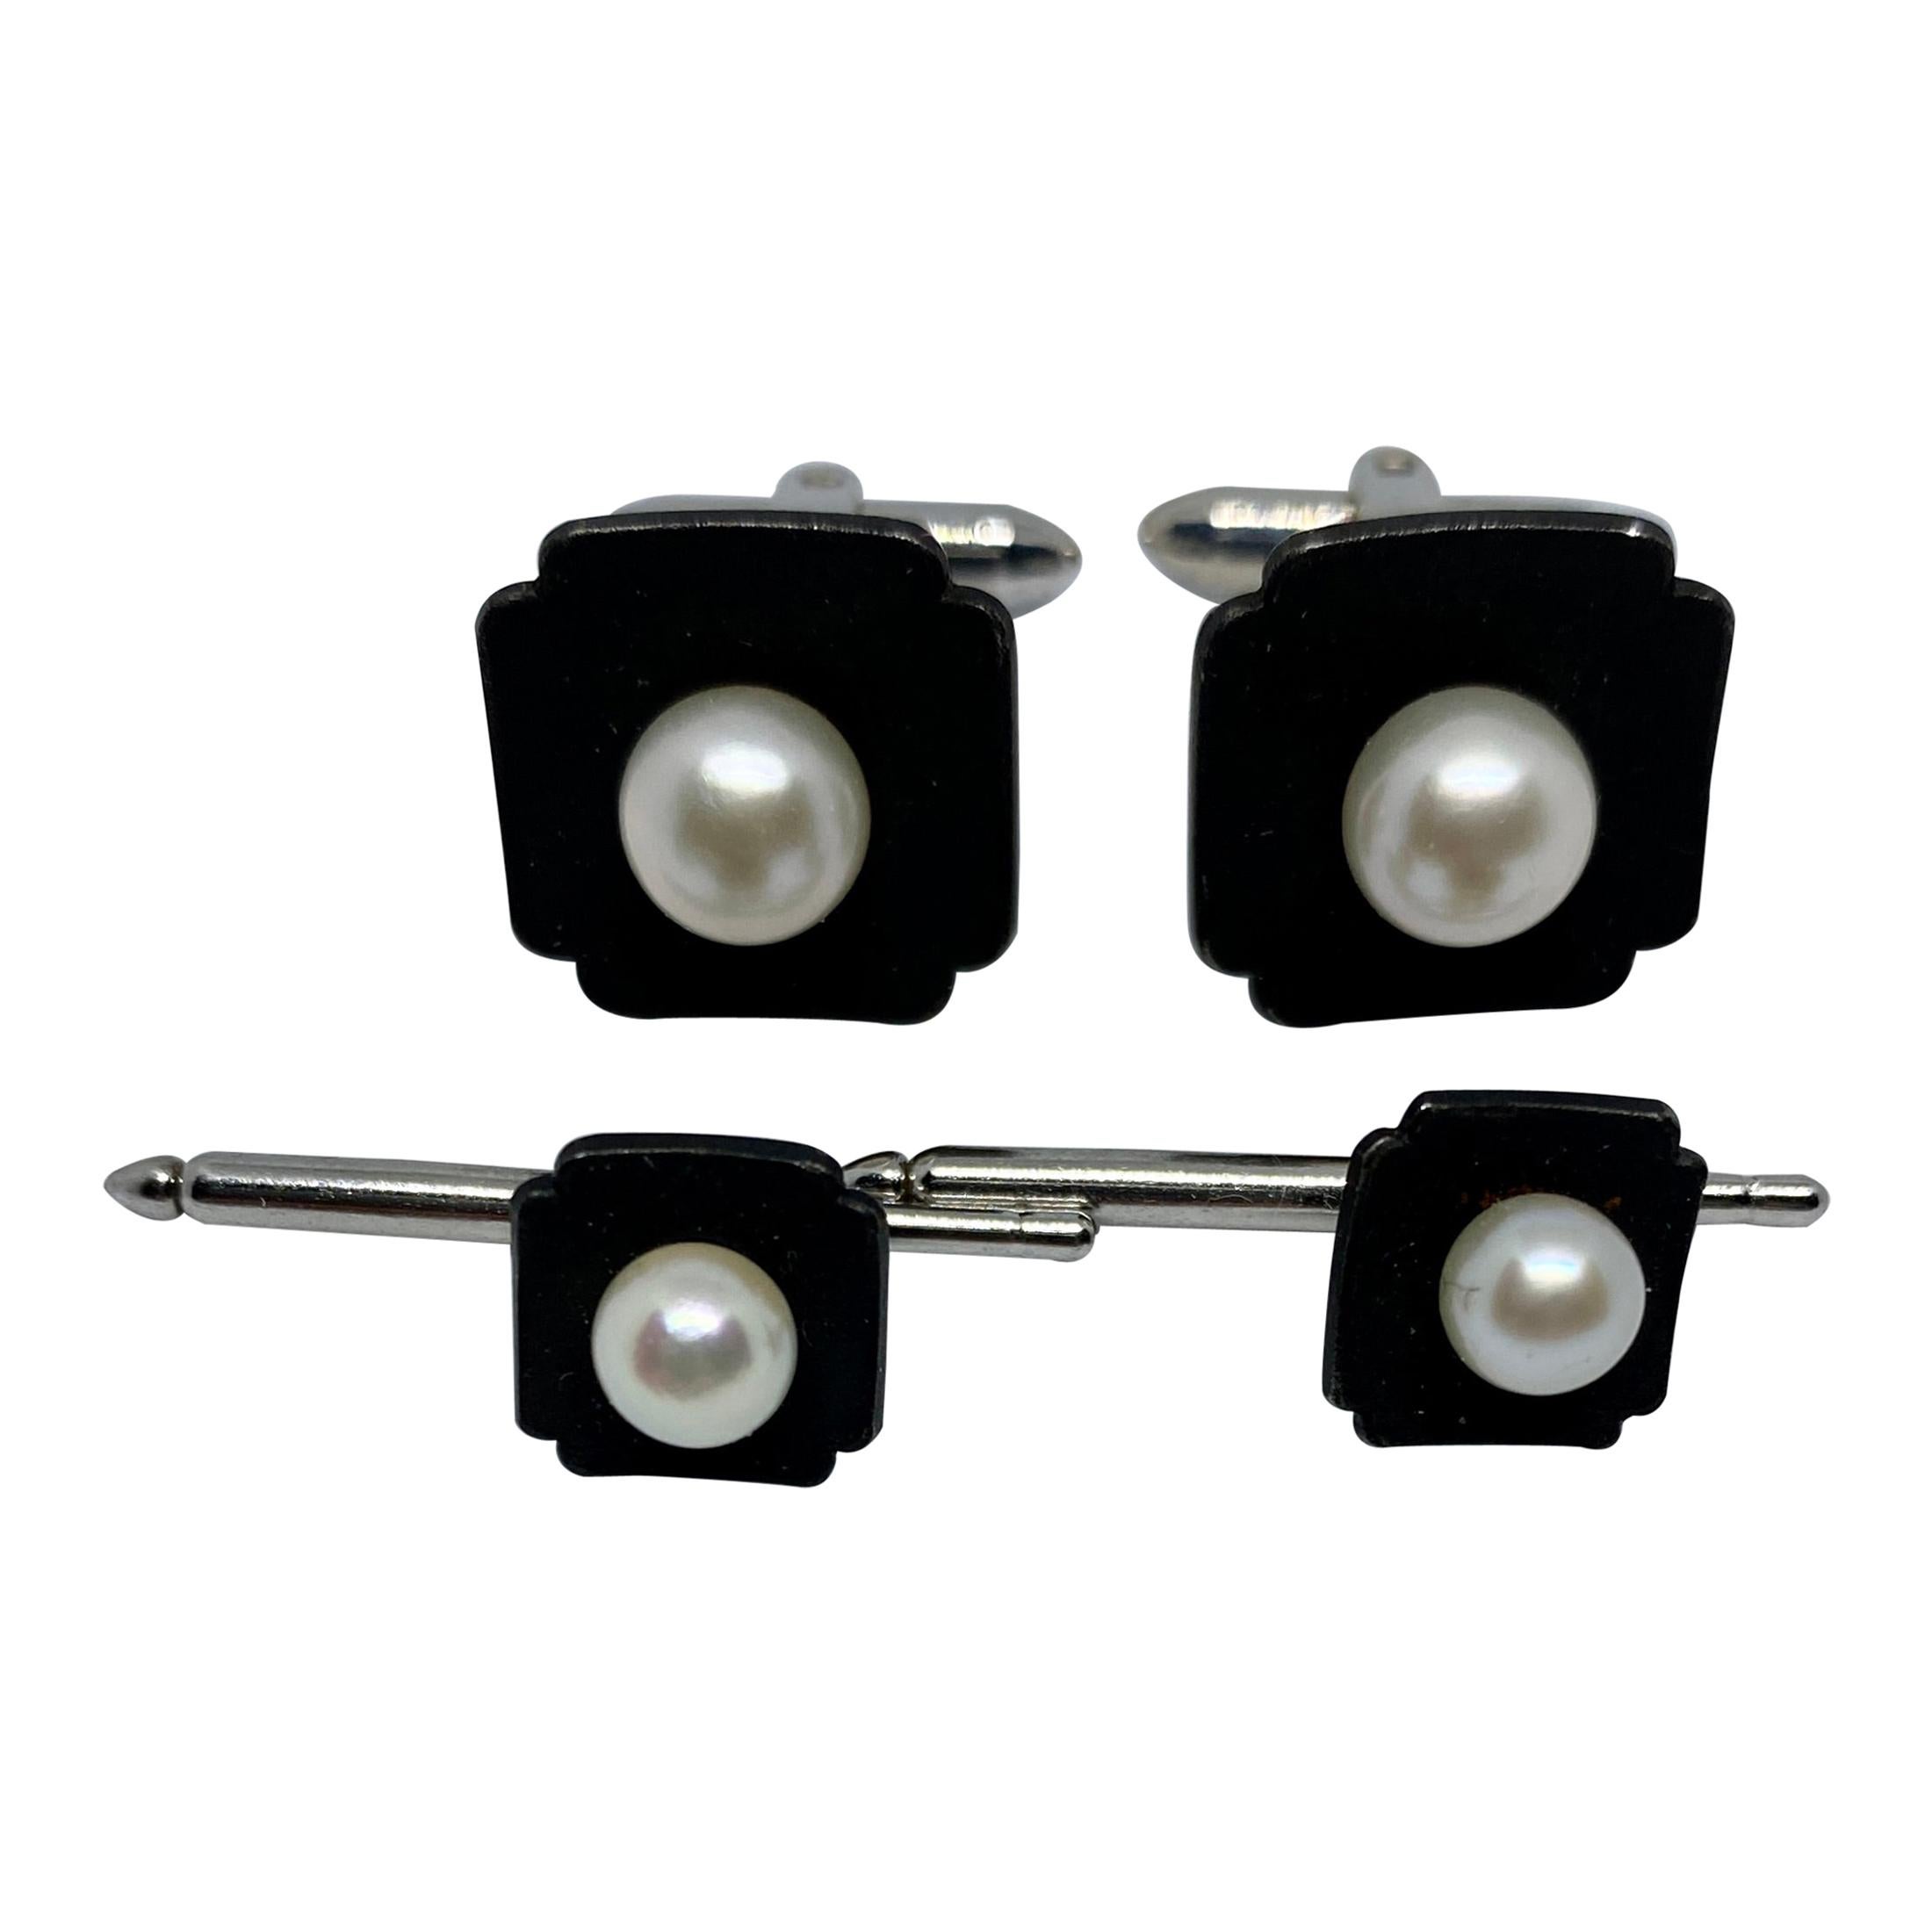 Marsh & Company Gold, Oxidized Steel and Cultured Pearl Cufflinks Dress Set For Sale